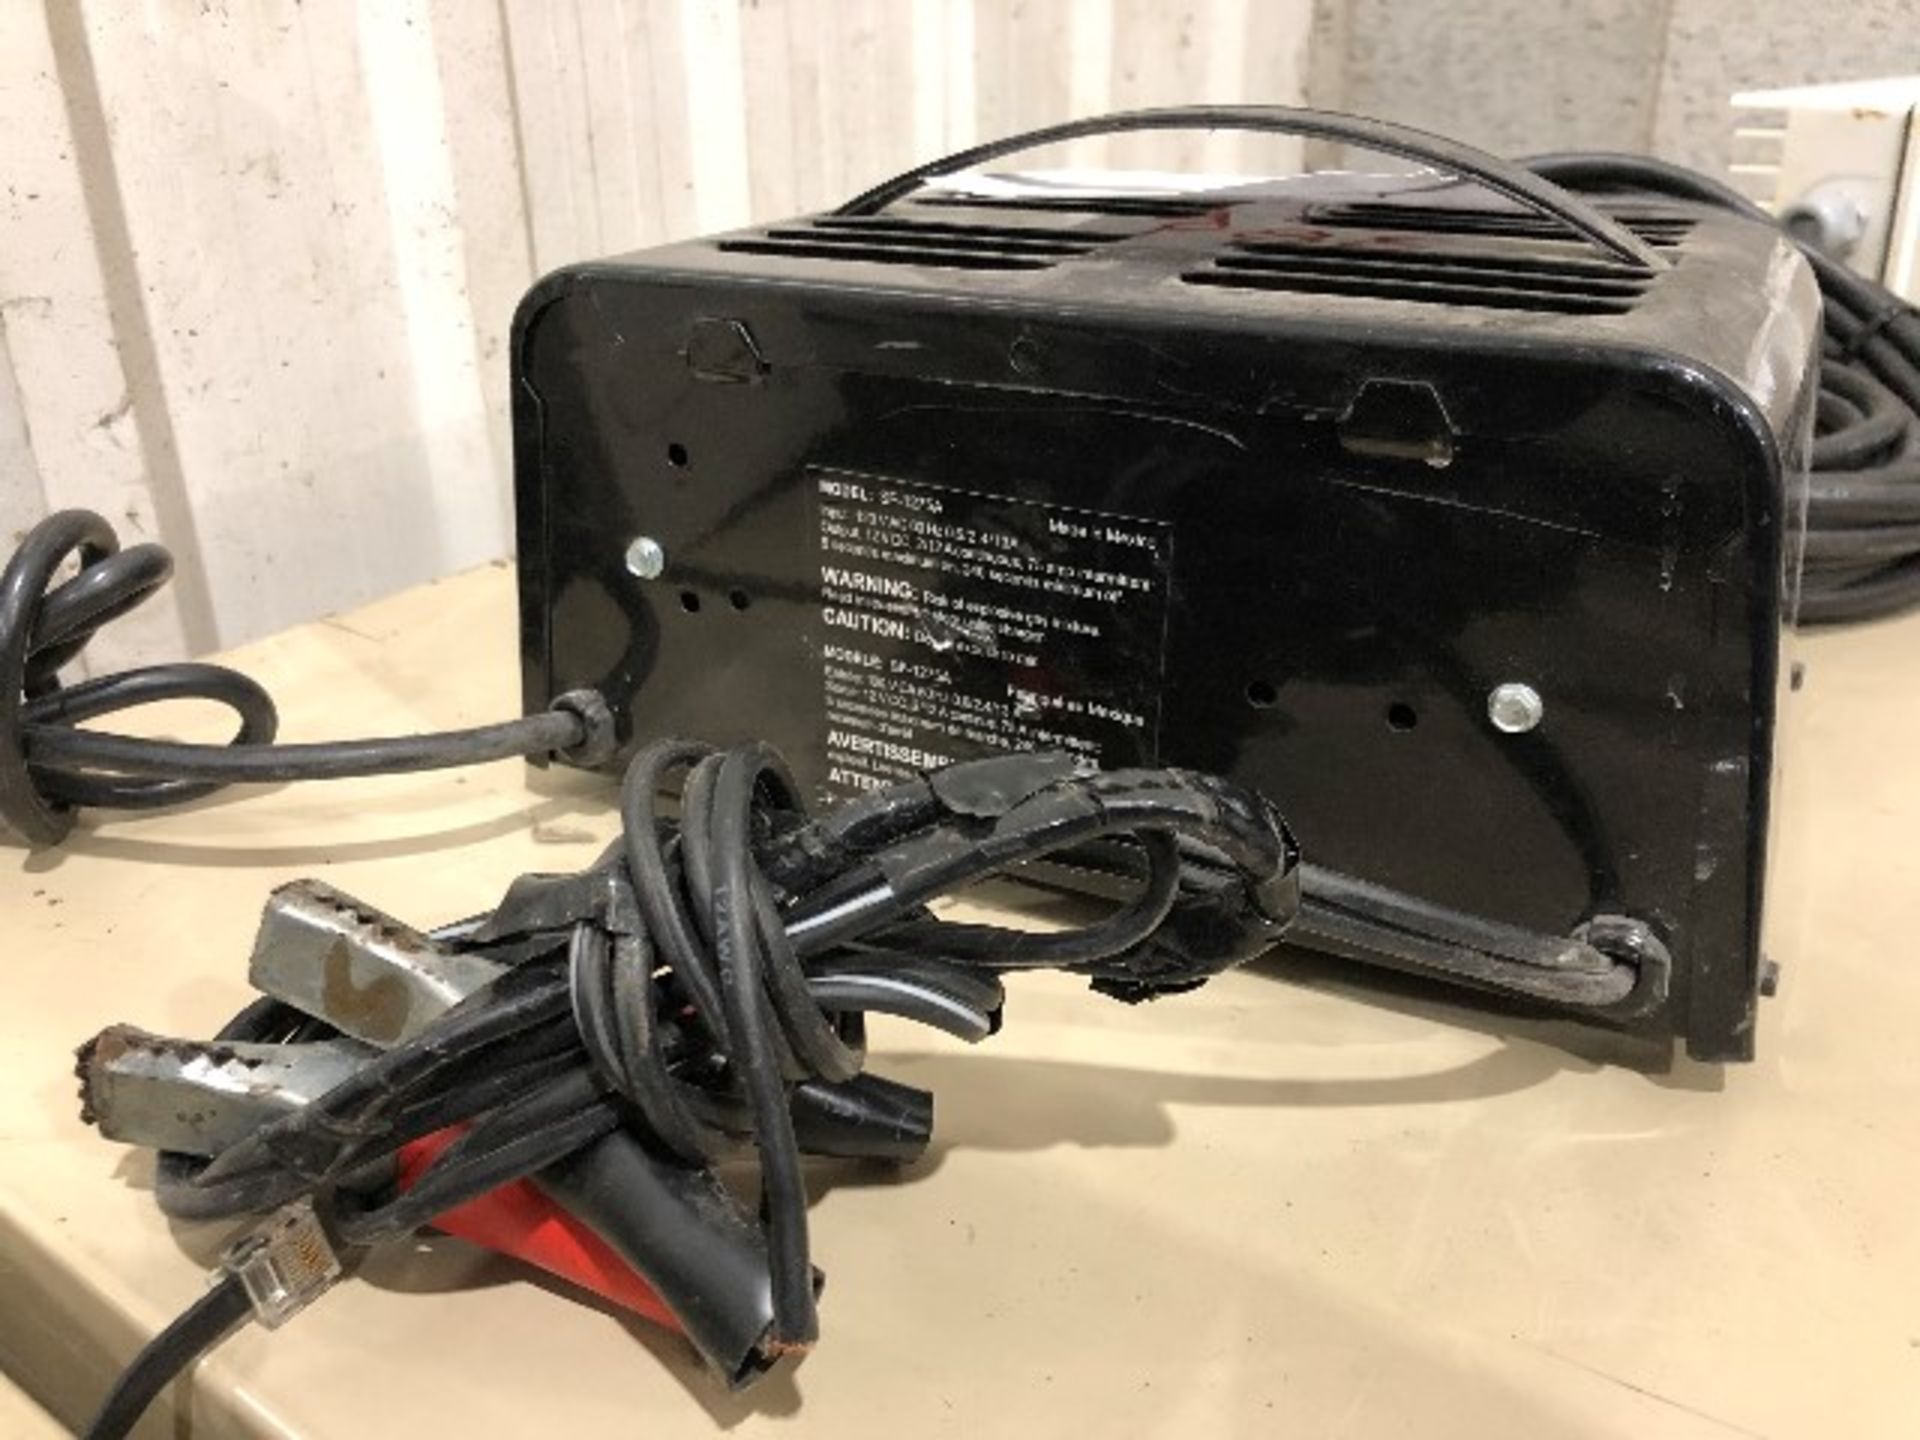 Schumacher SF-1275A battery charger - Image 2 of 2